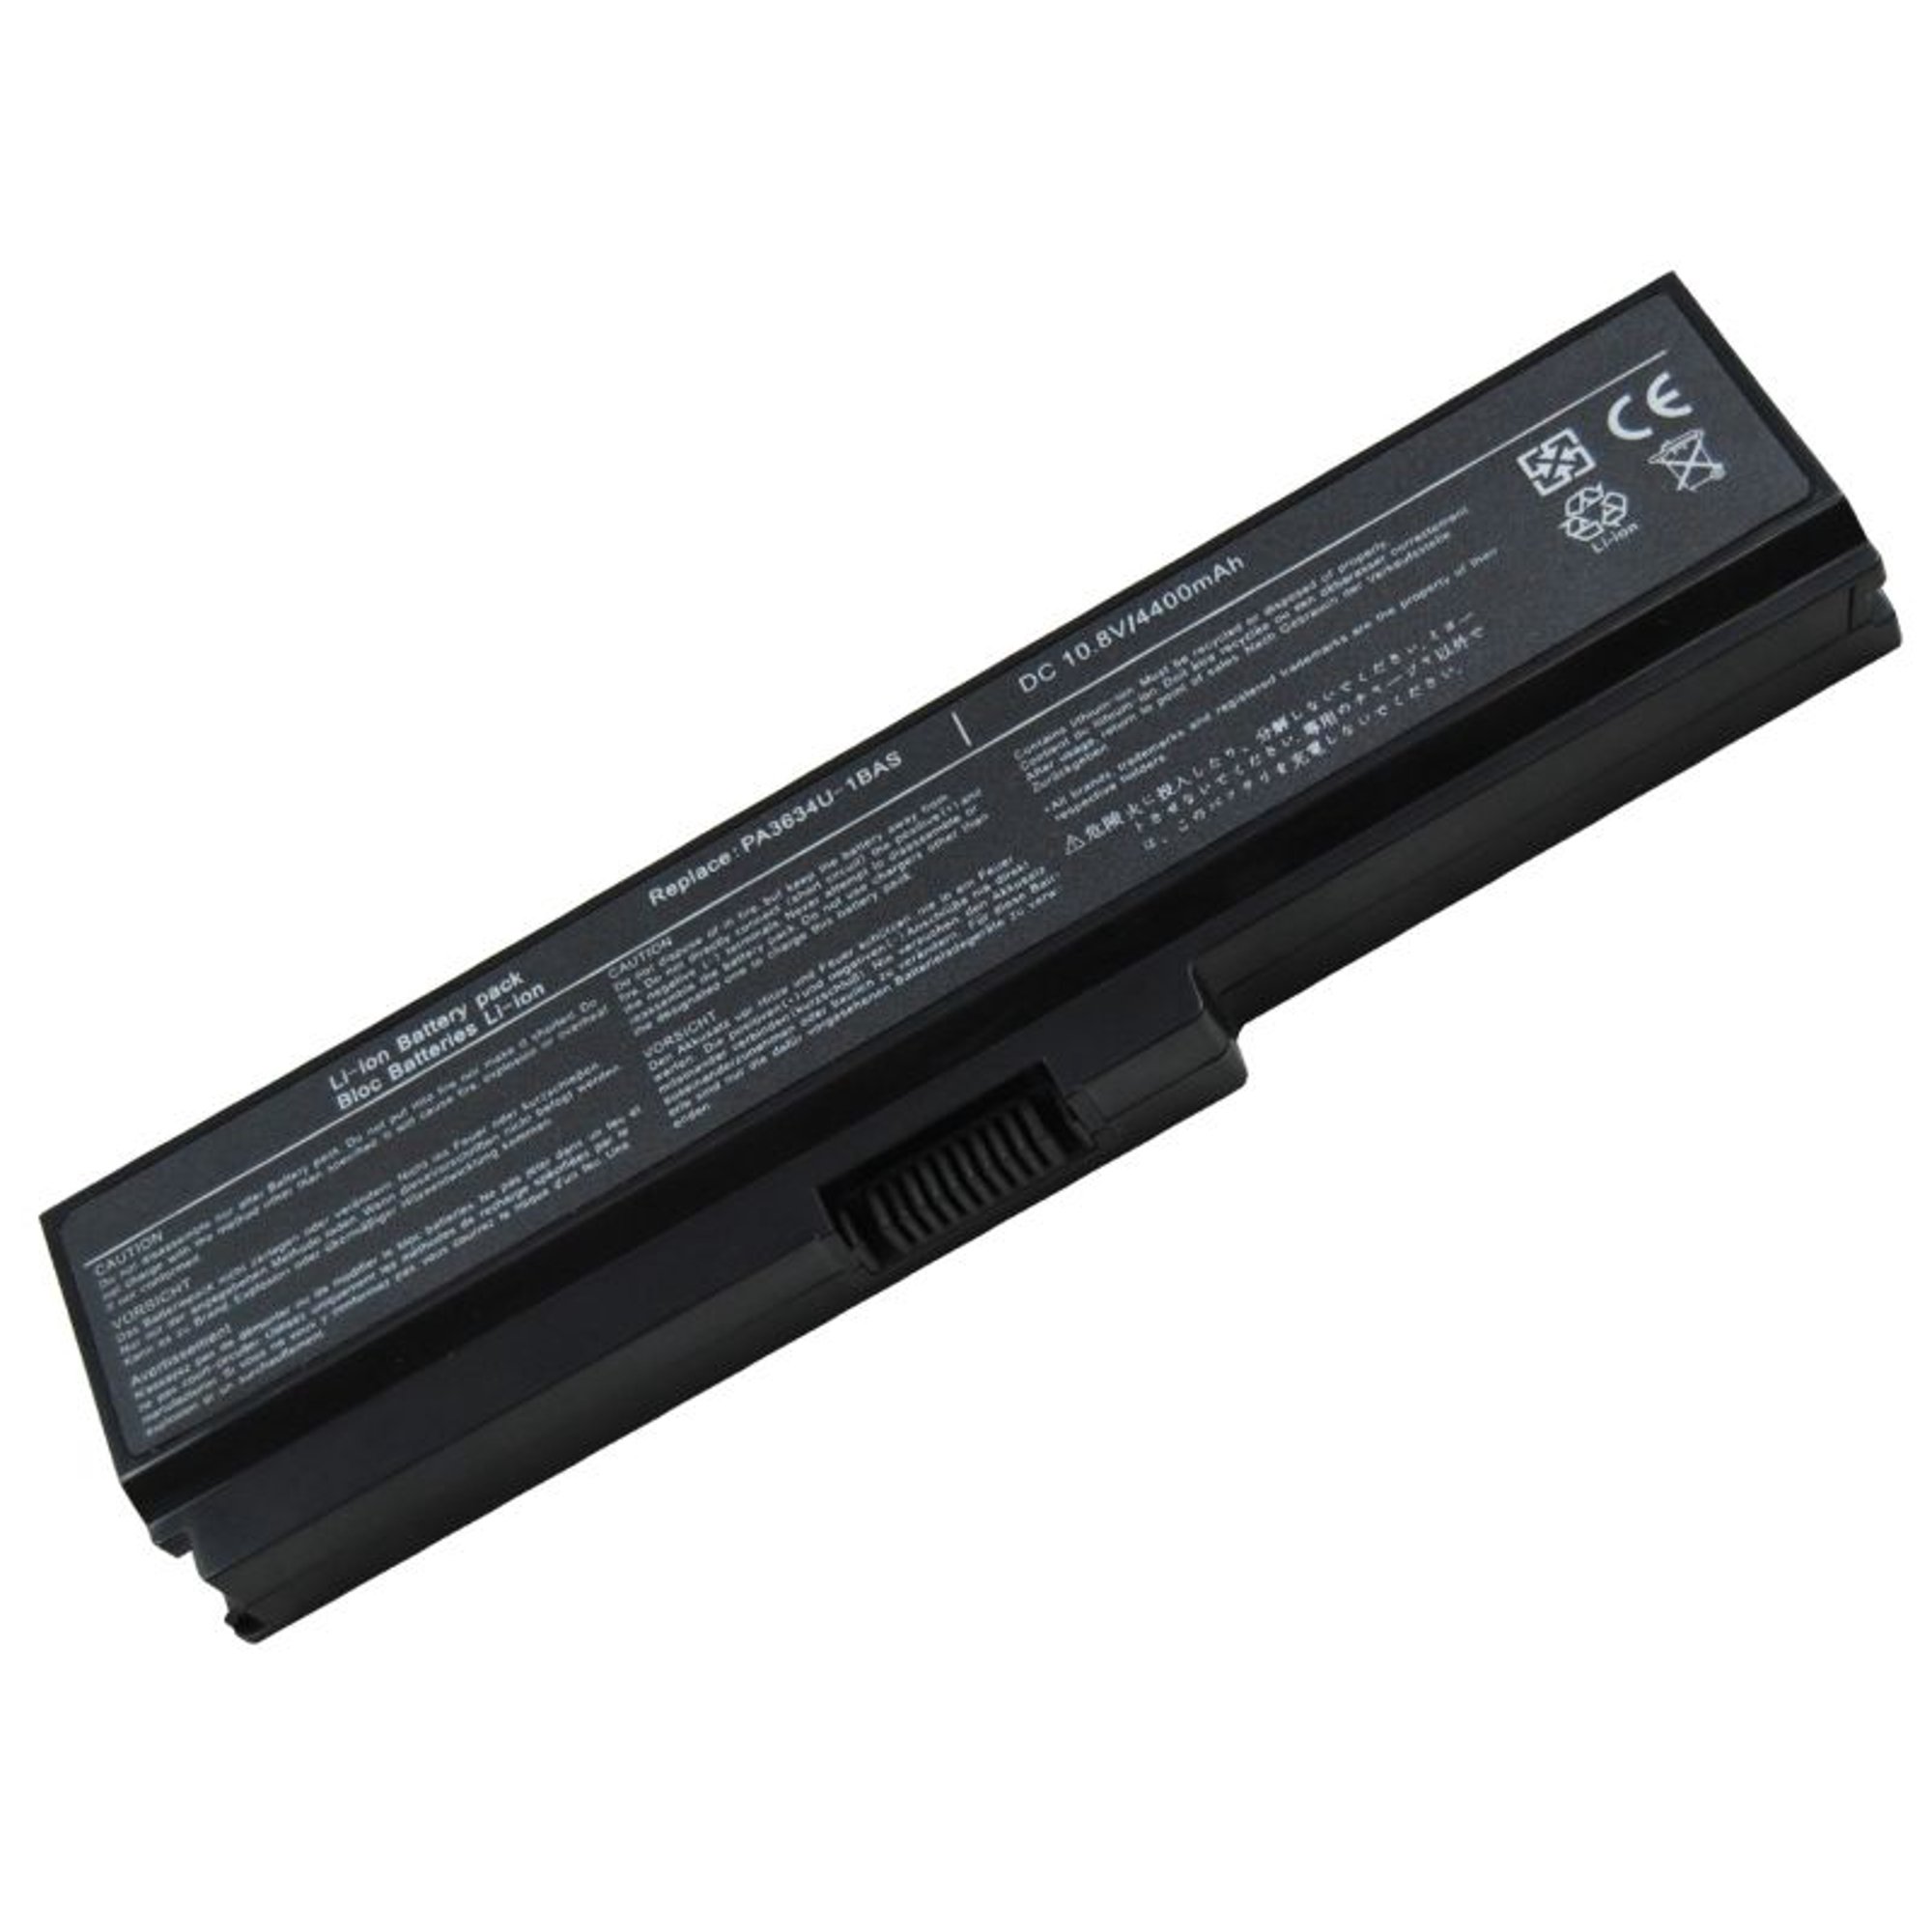 BATTERY FOR TOSHIBA LAPTOP U405 -S2854